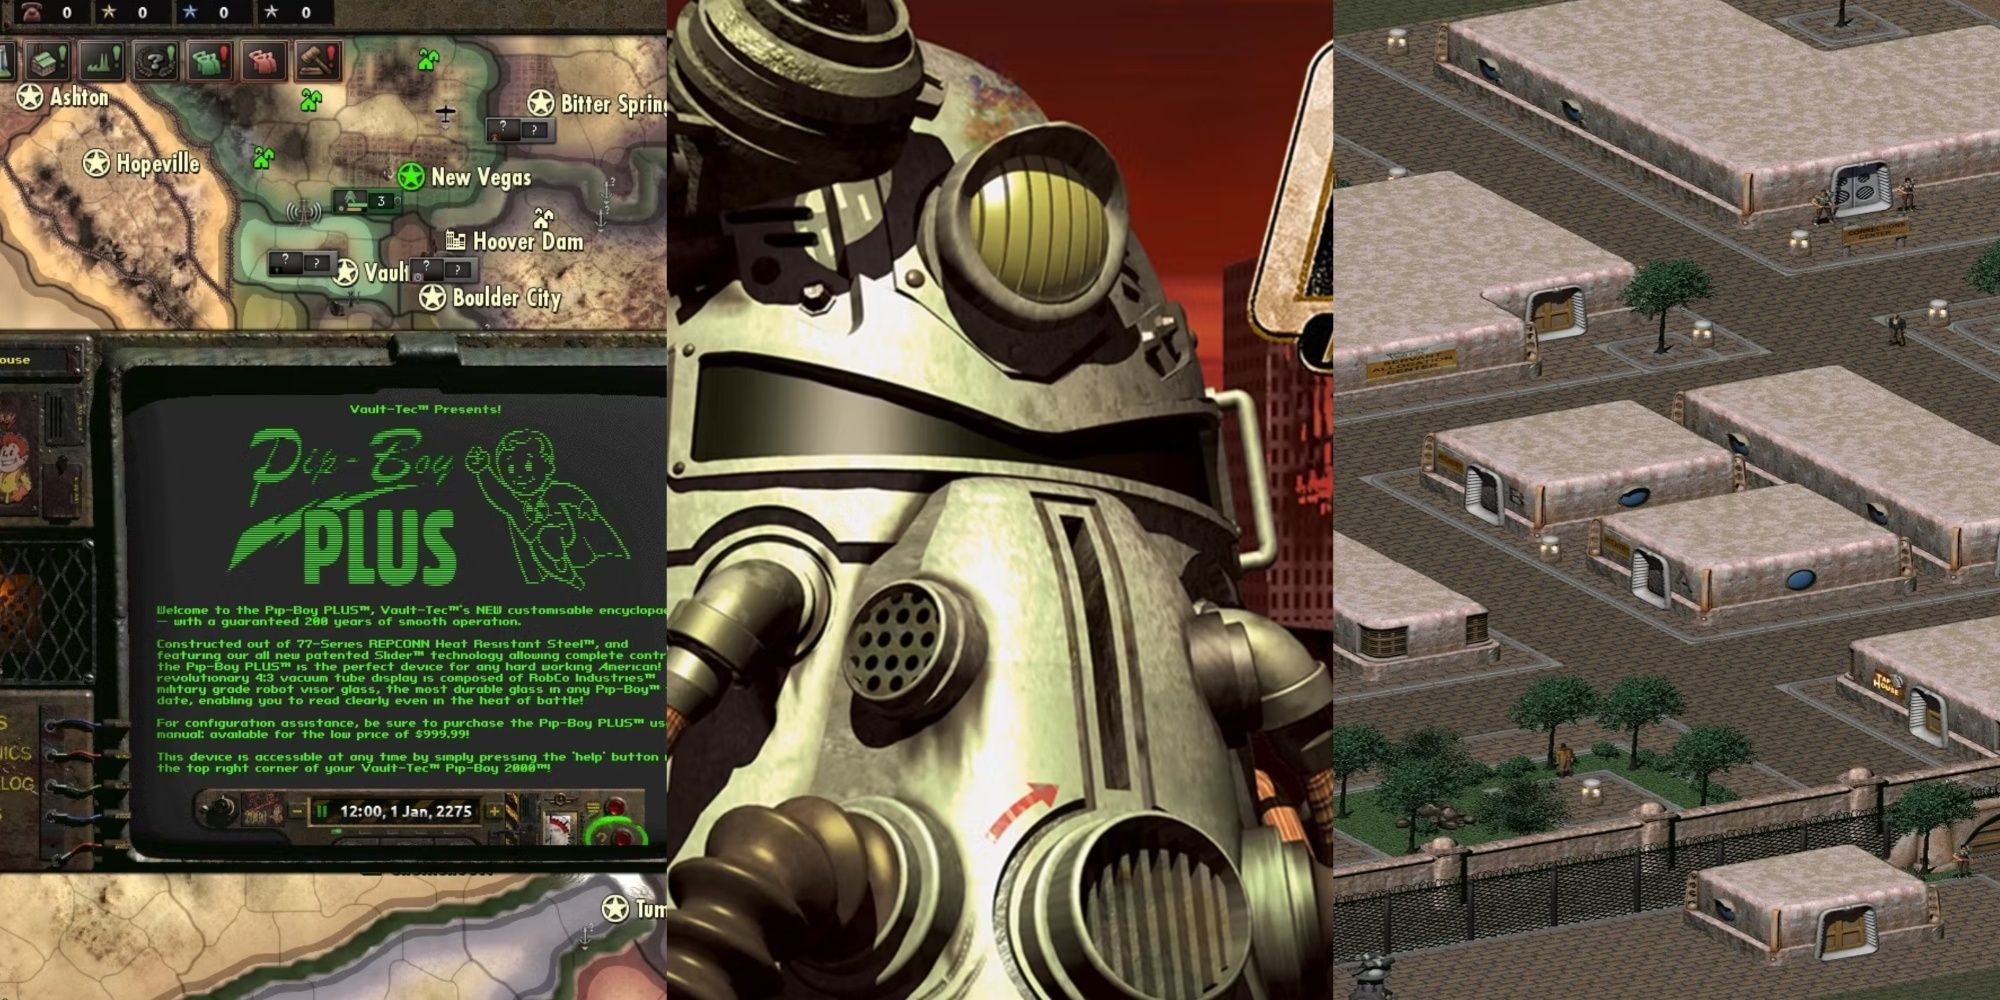 Obsidian founder says the studio wants to make another 'Fallout' game